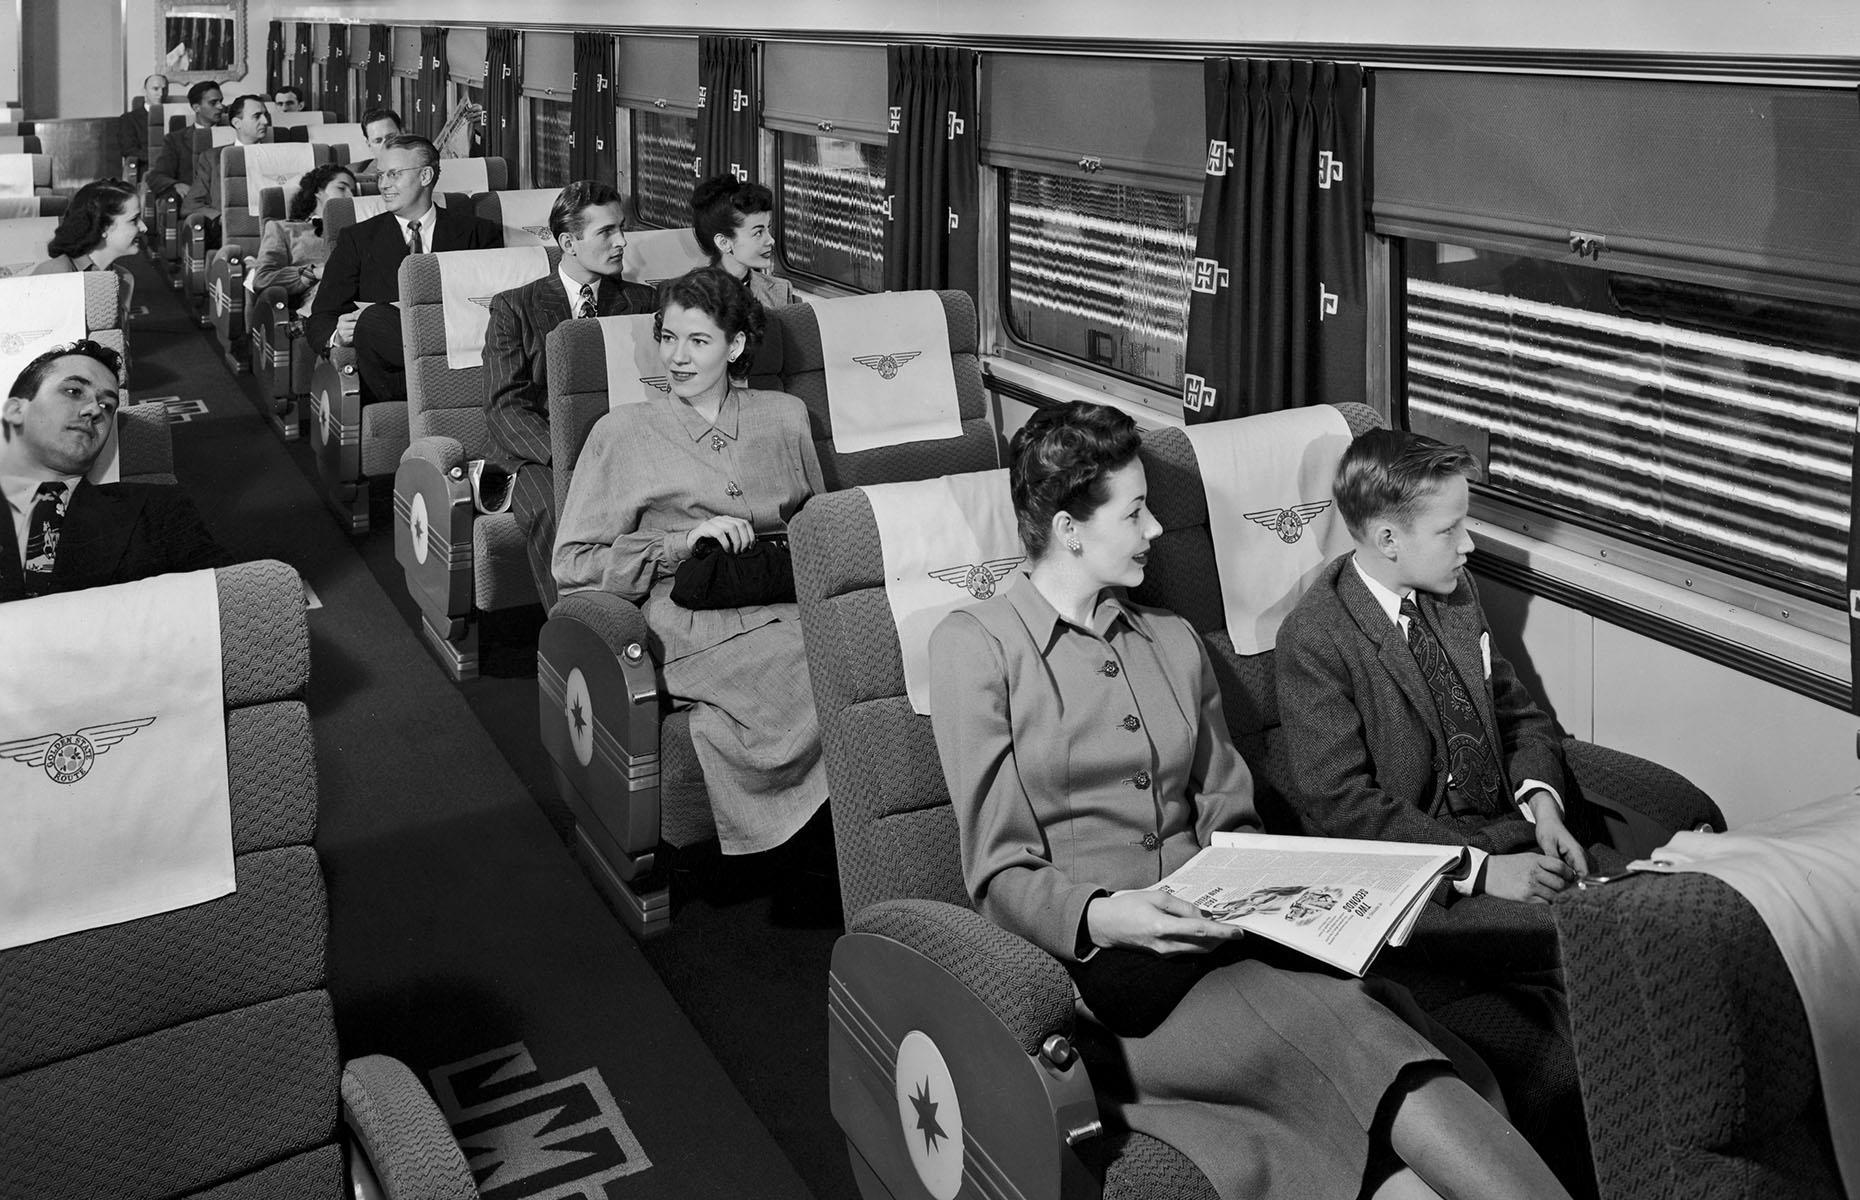 Introduced in November 1939, Rocky Mountain Rocket was one of the six streamlined trains traveling between Chicago and Denver. As competition along that route was stiff, the Rocket offered its passengers total comfort during the 13-hour trip. The train had a 32-patron diner and 14-patron cocktail lounge cars, two sleeping cars and a sleeper-observation car as well as coaches with wide and cushioned reclining seats.